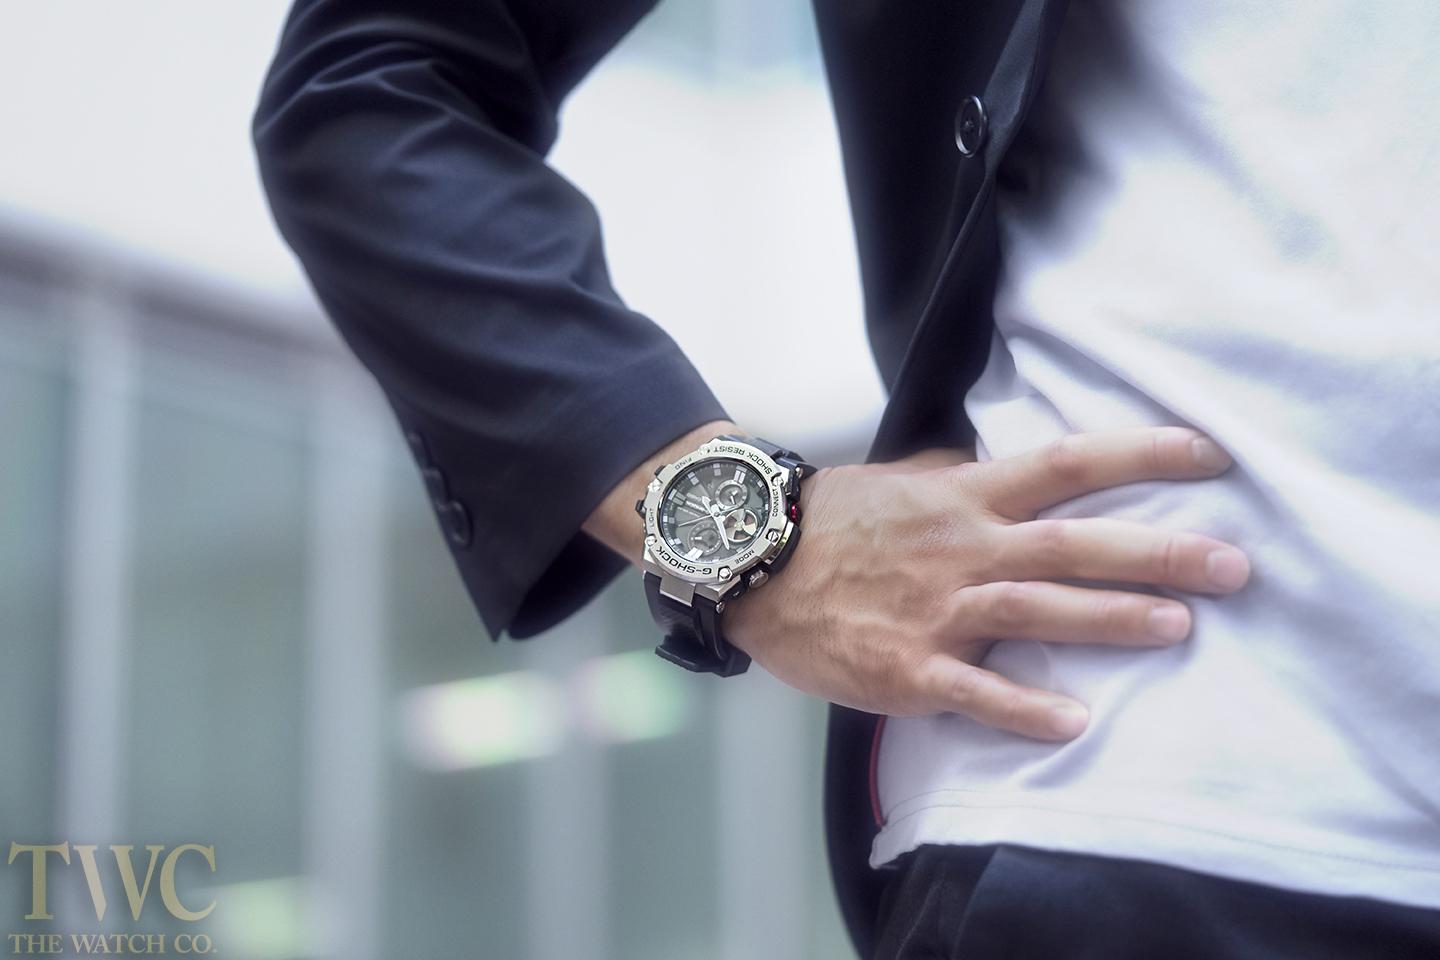 Premium Casio Watches Every Man On Budget Should Have - Watch Company